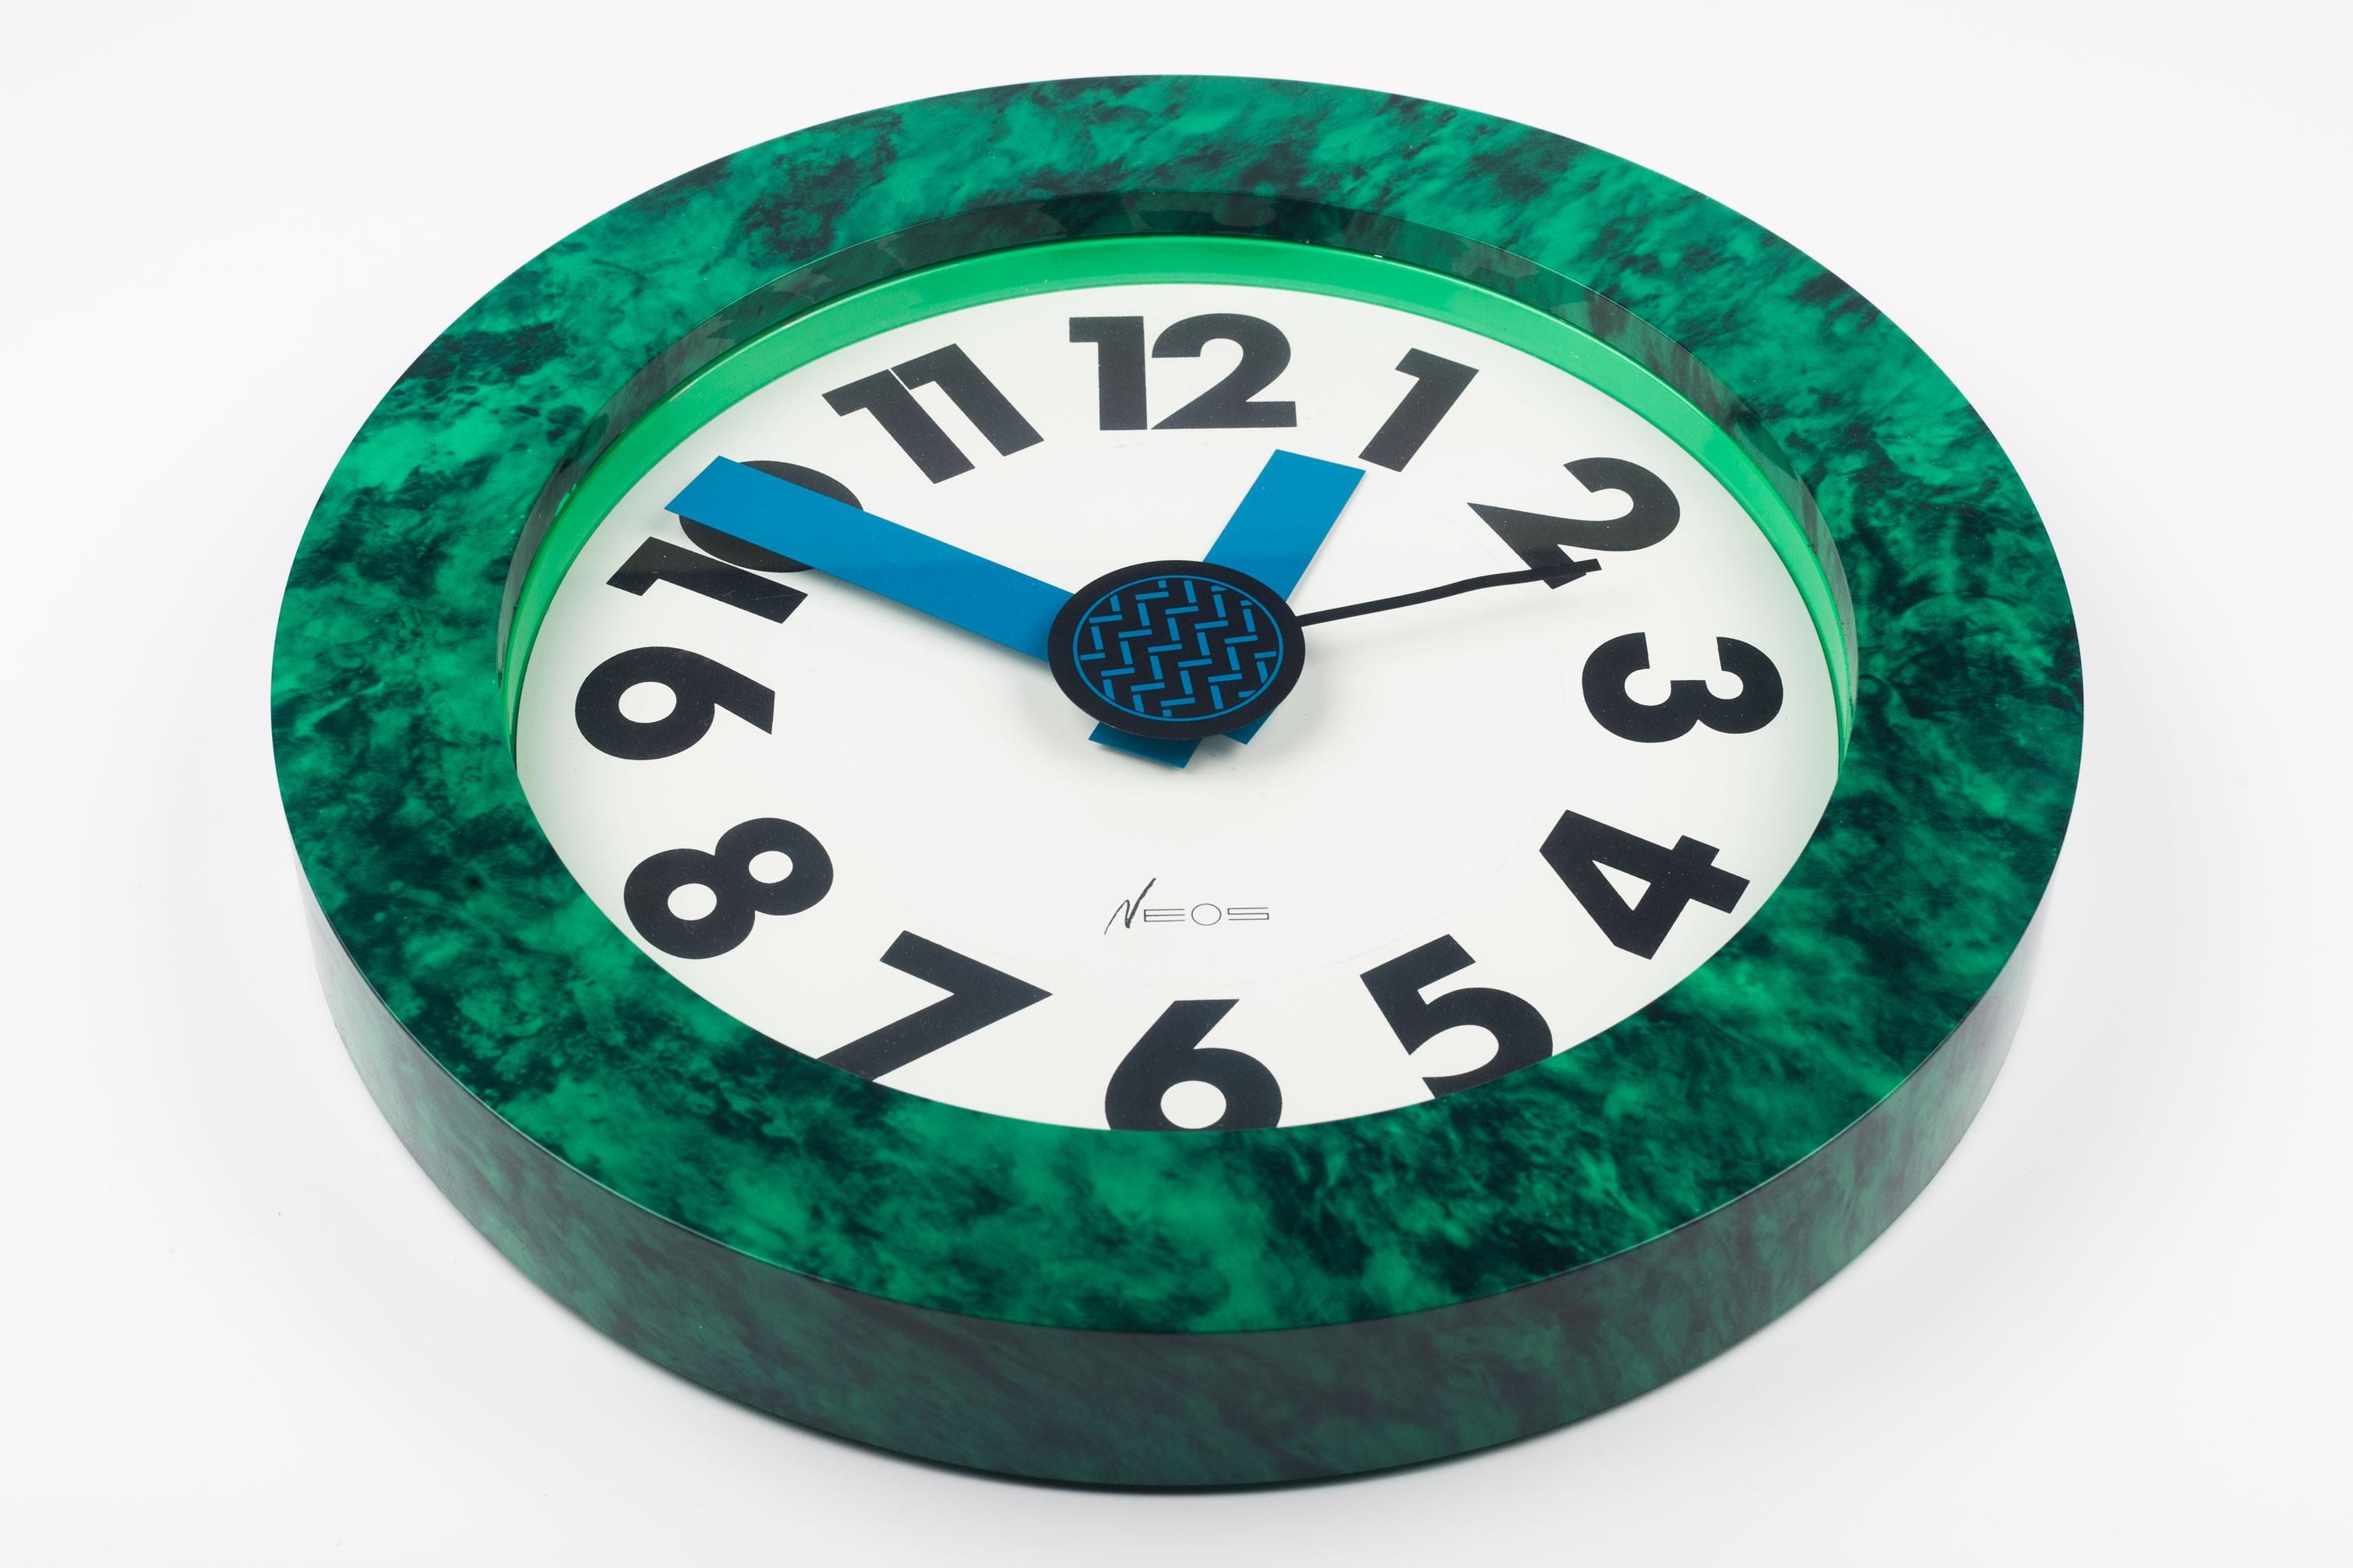 Post-Modern Memphis Wall Clock Green Marble Pattern du Pasquier and Sowden, Neos Italy 1980s